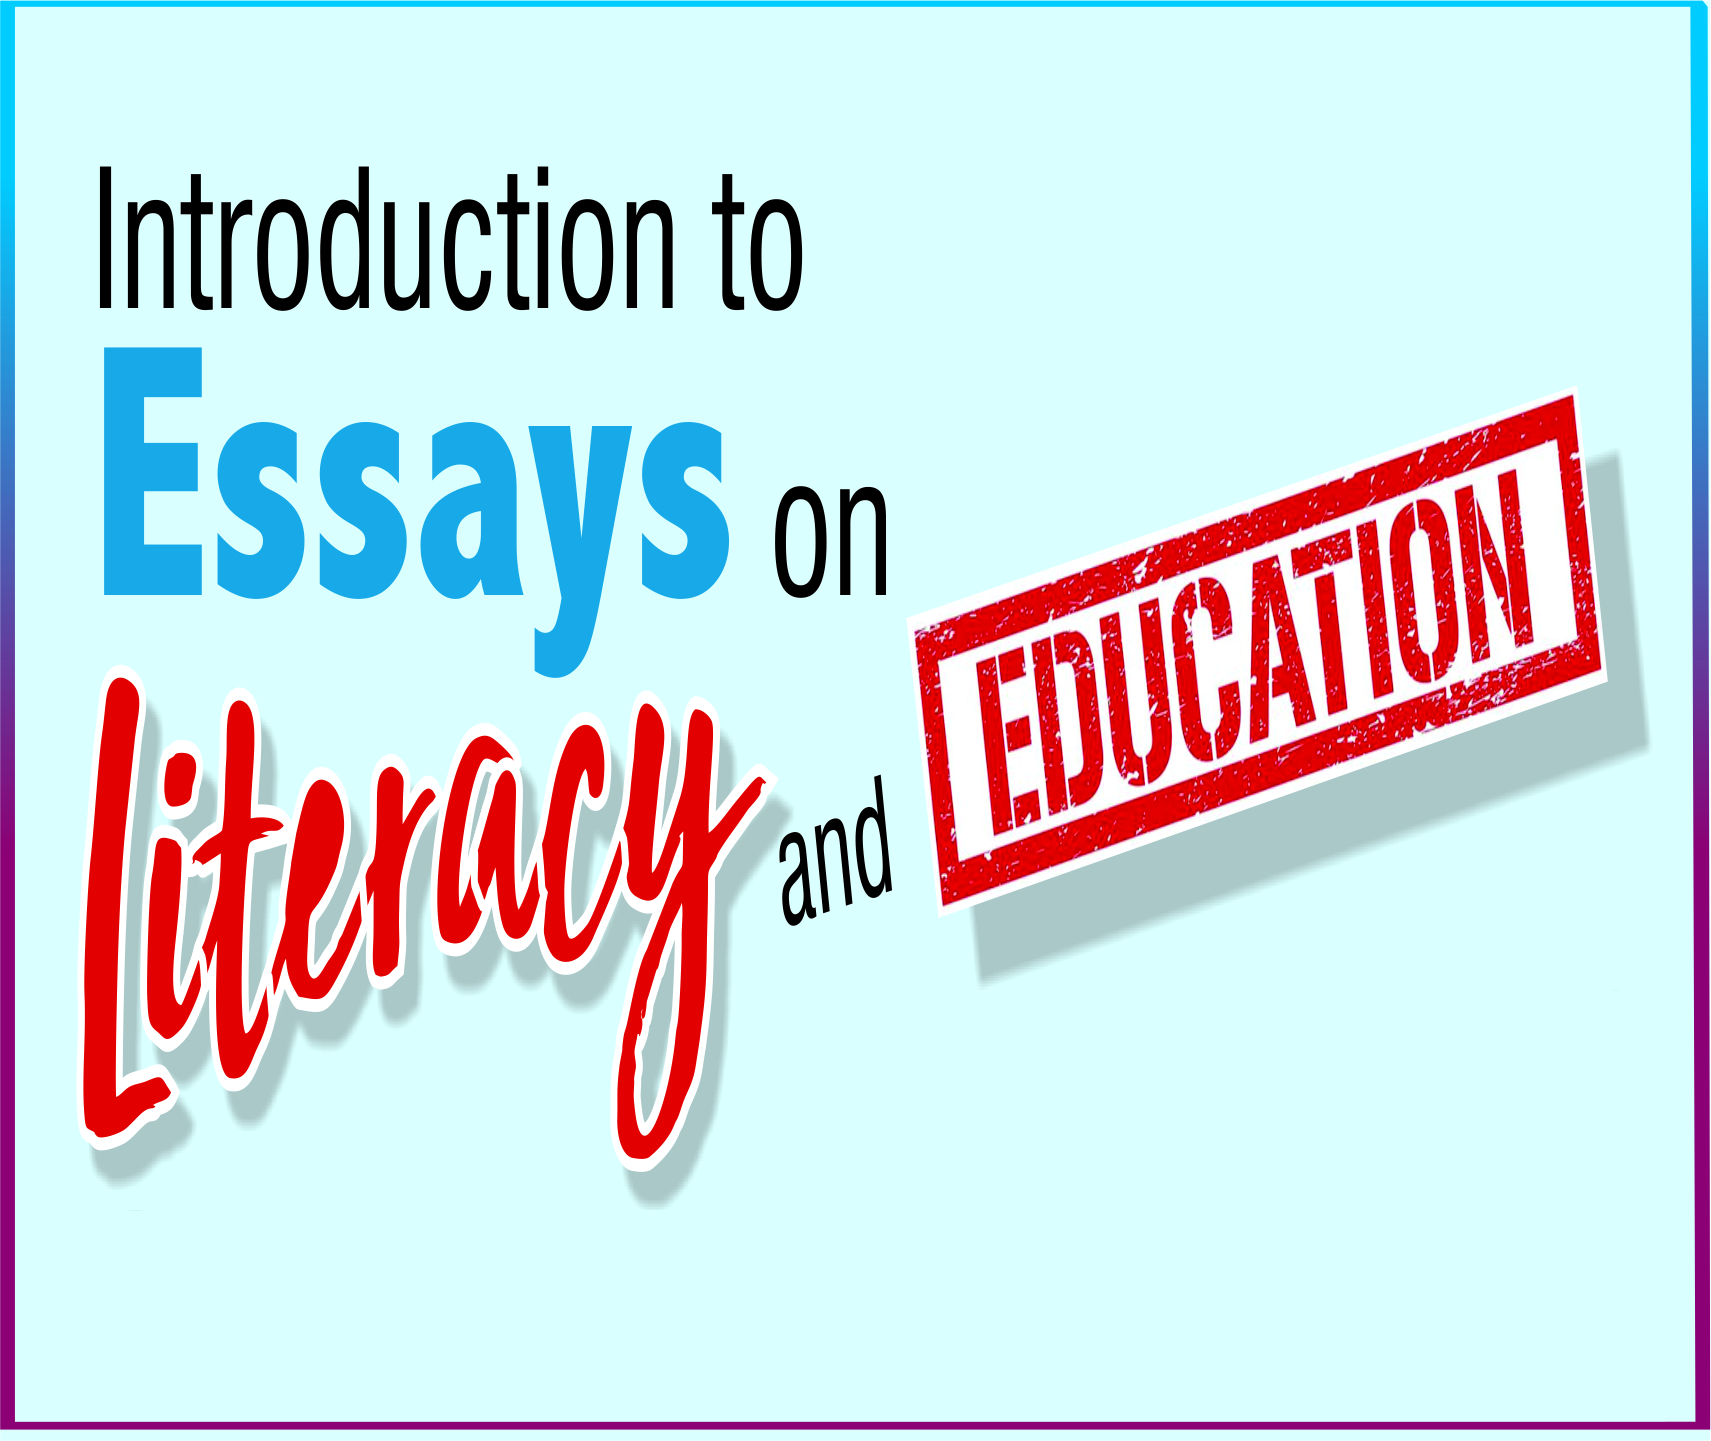 You are currently viewing Introduction to Essays on Literacy and Education